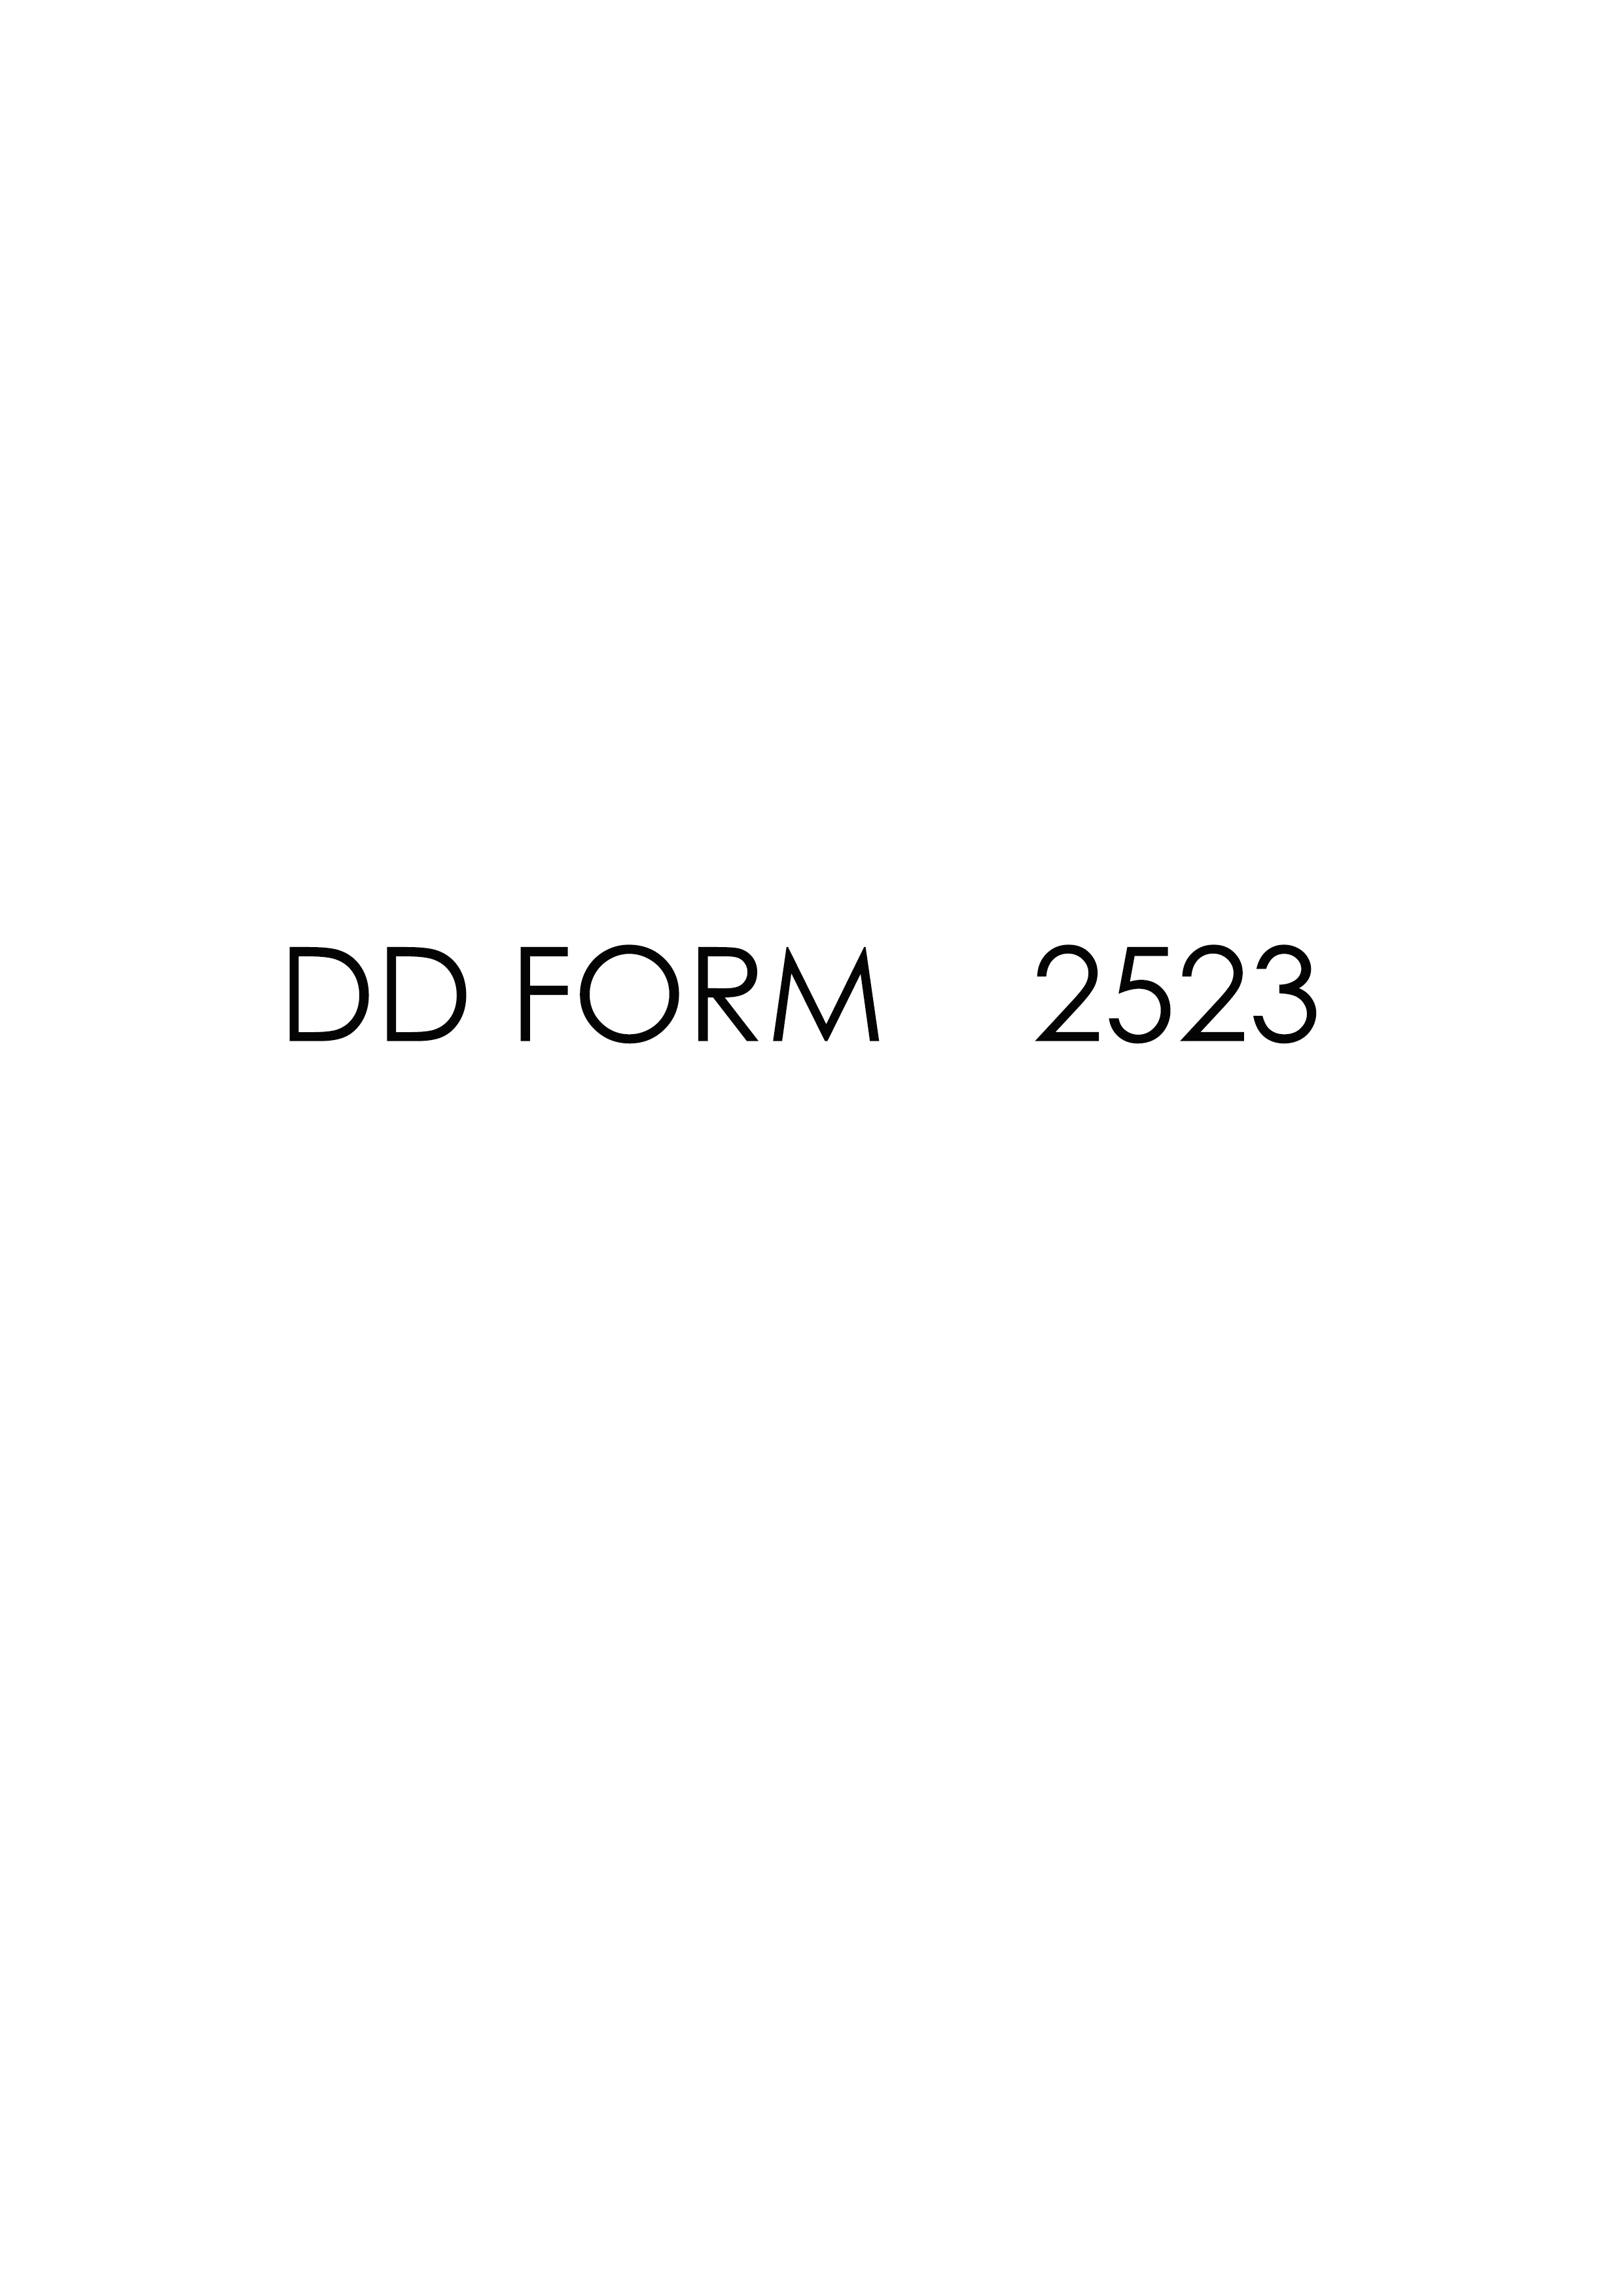 Download Fillable dd Form 2523